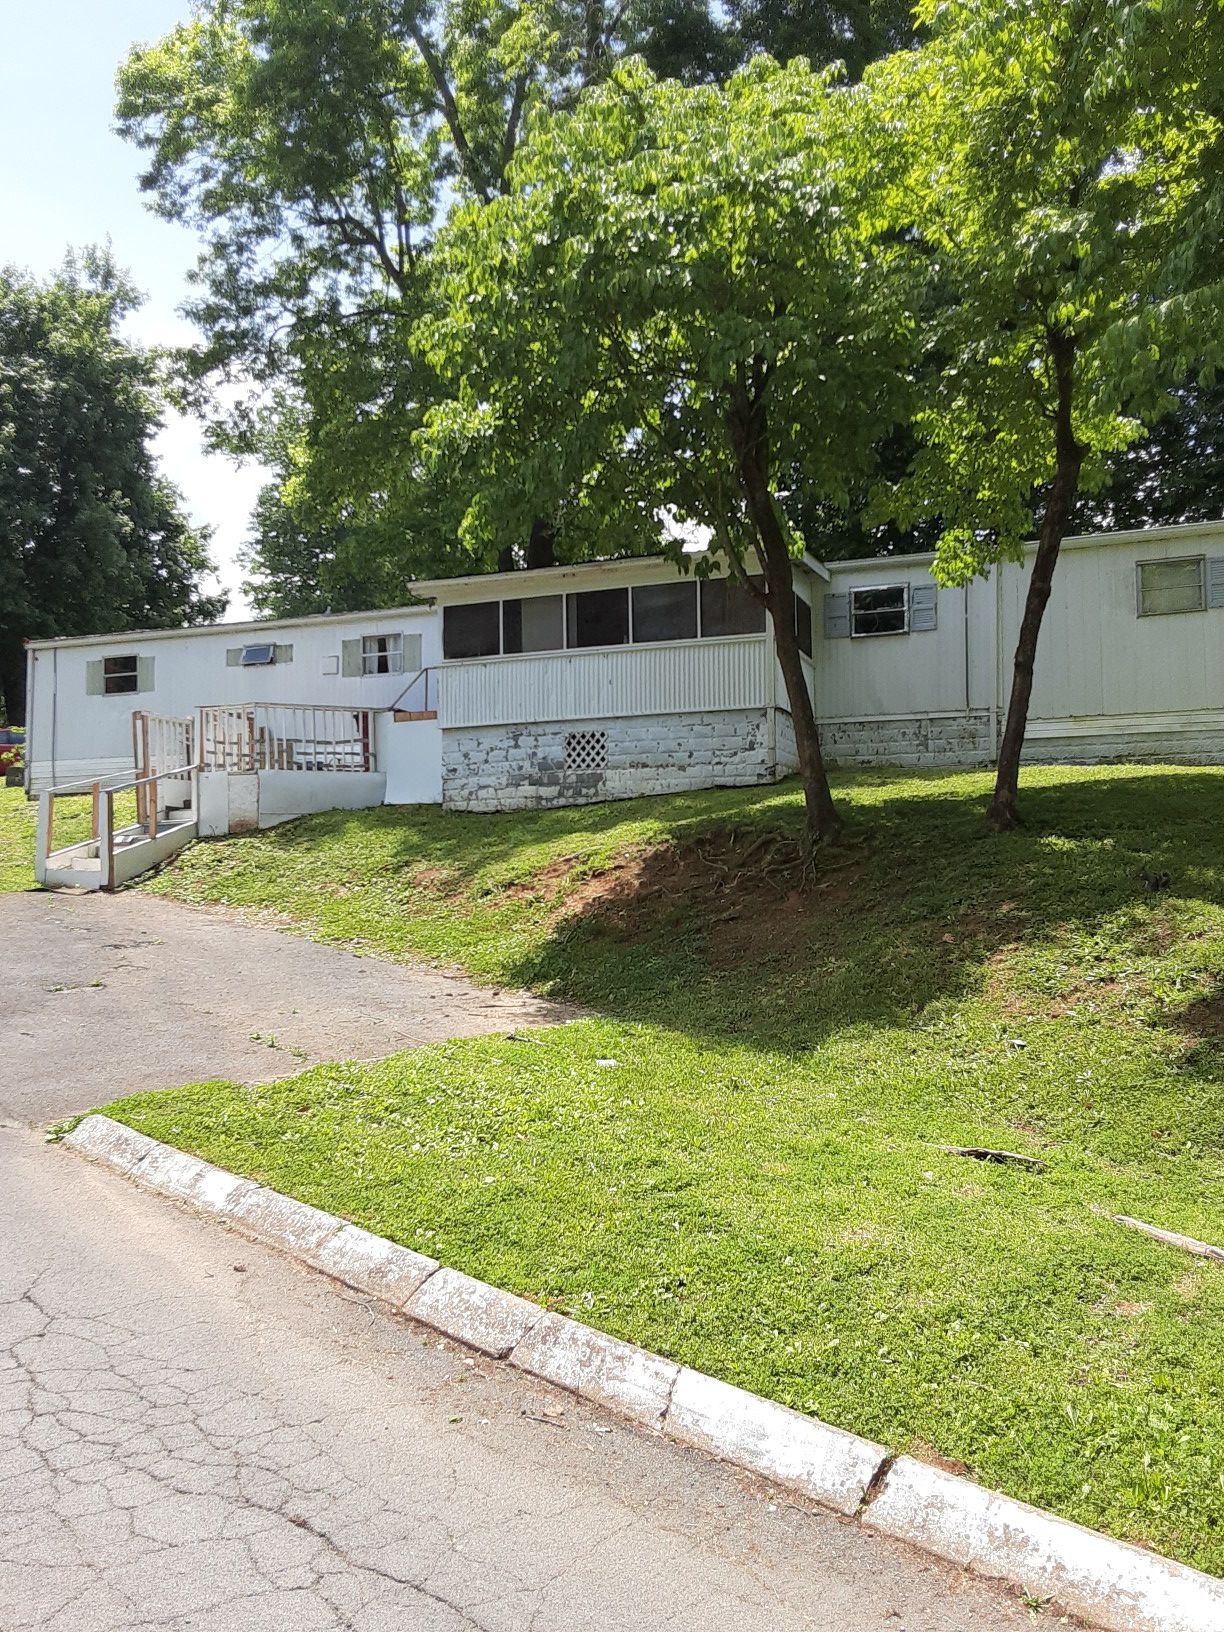 Photo 3 bedroom 1bath trailer n heritage park lot13 call lucus at contact info removed